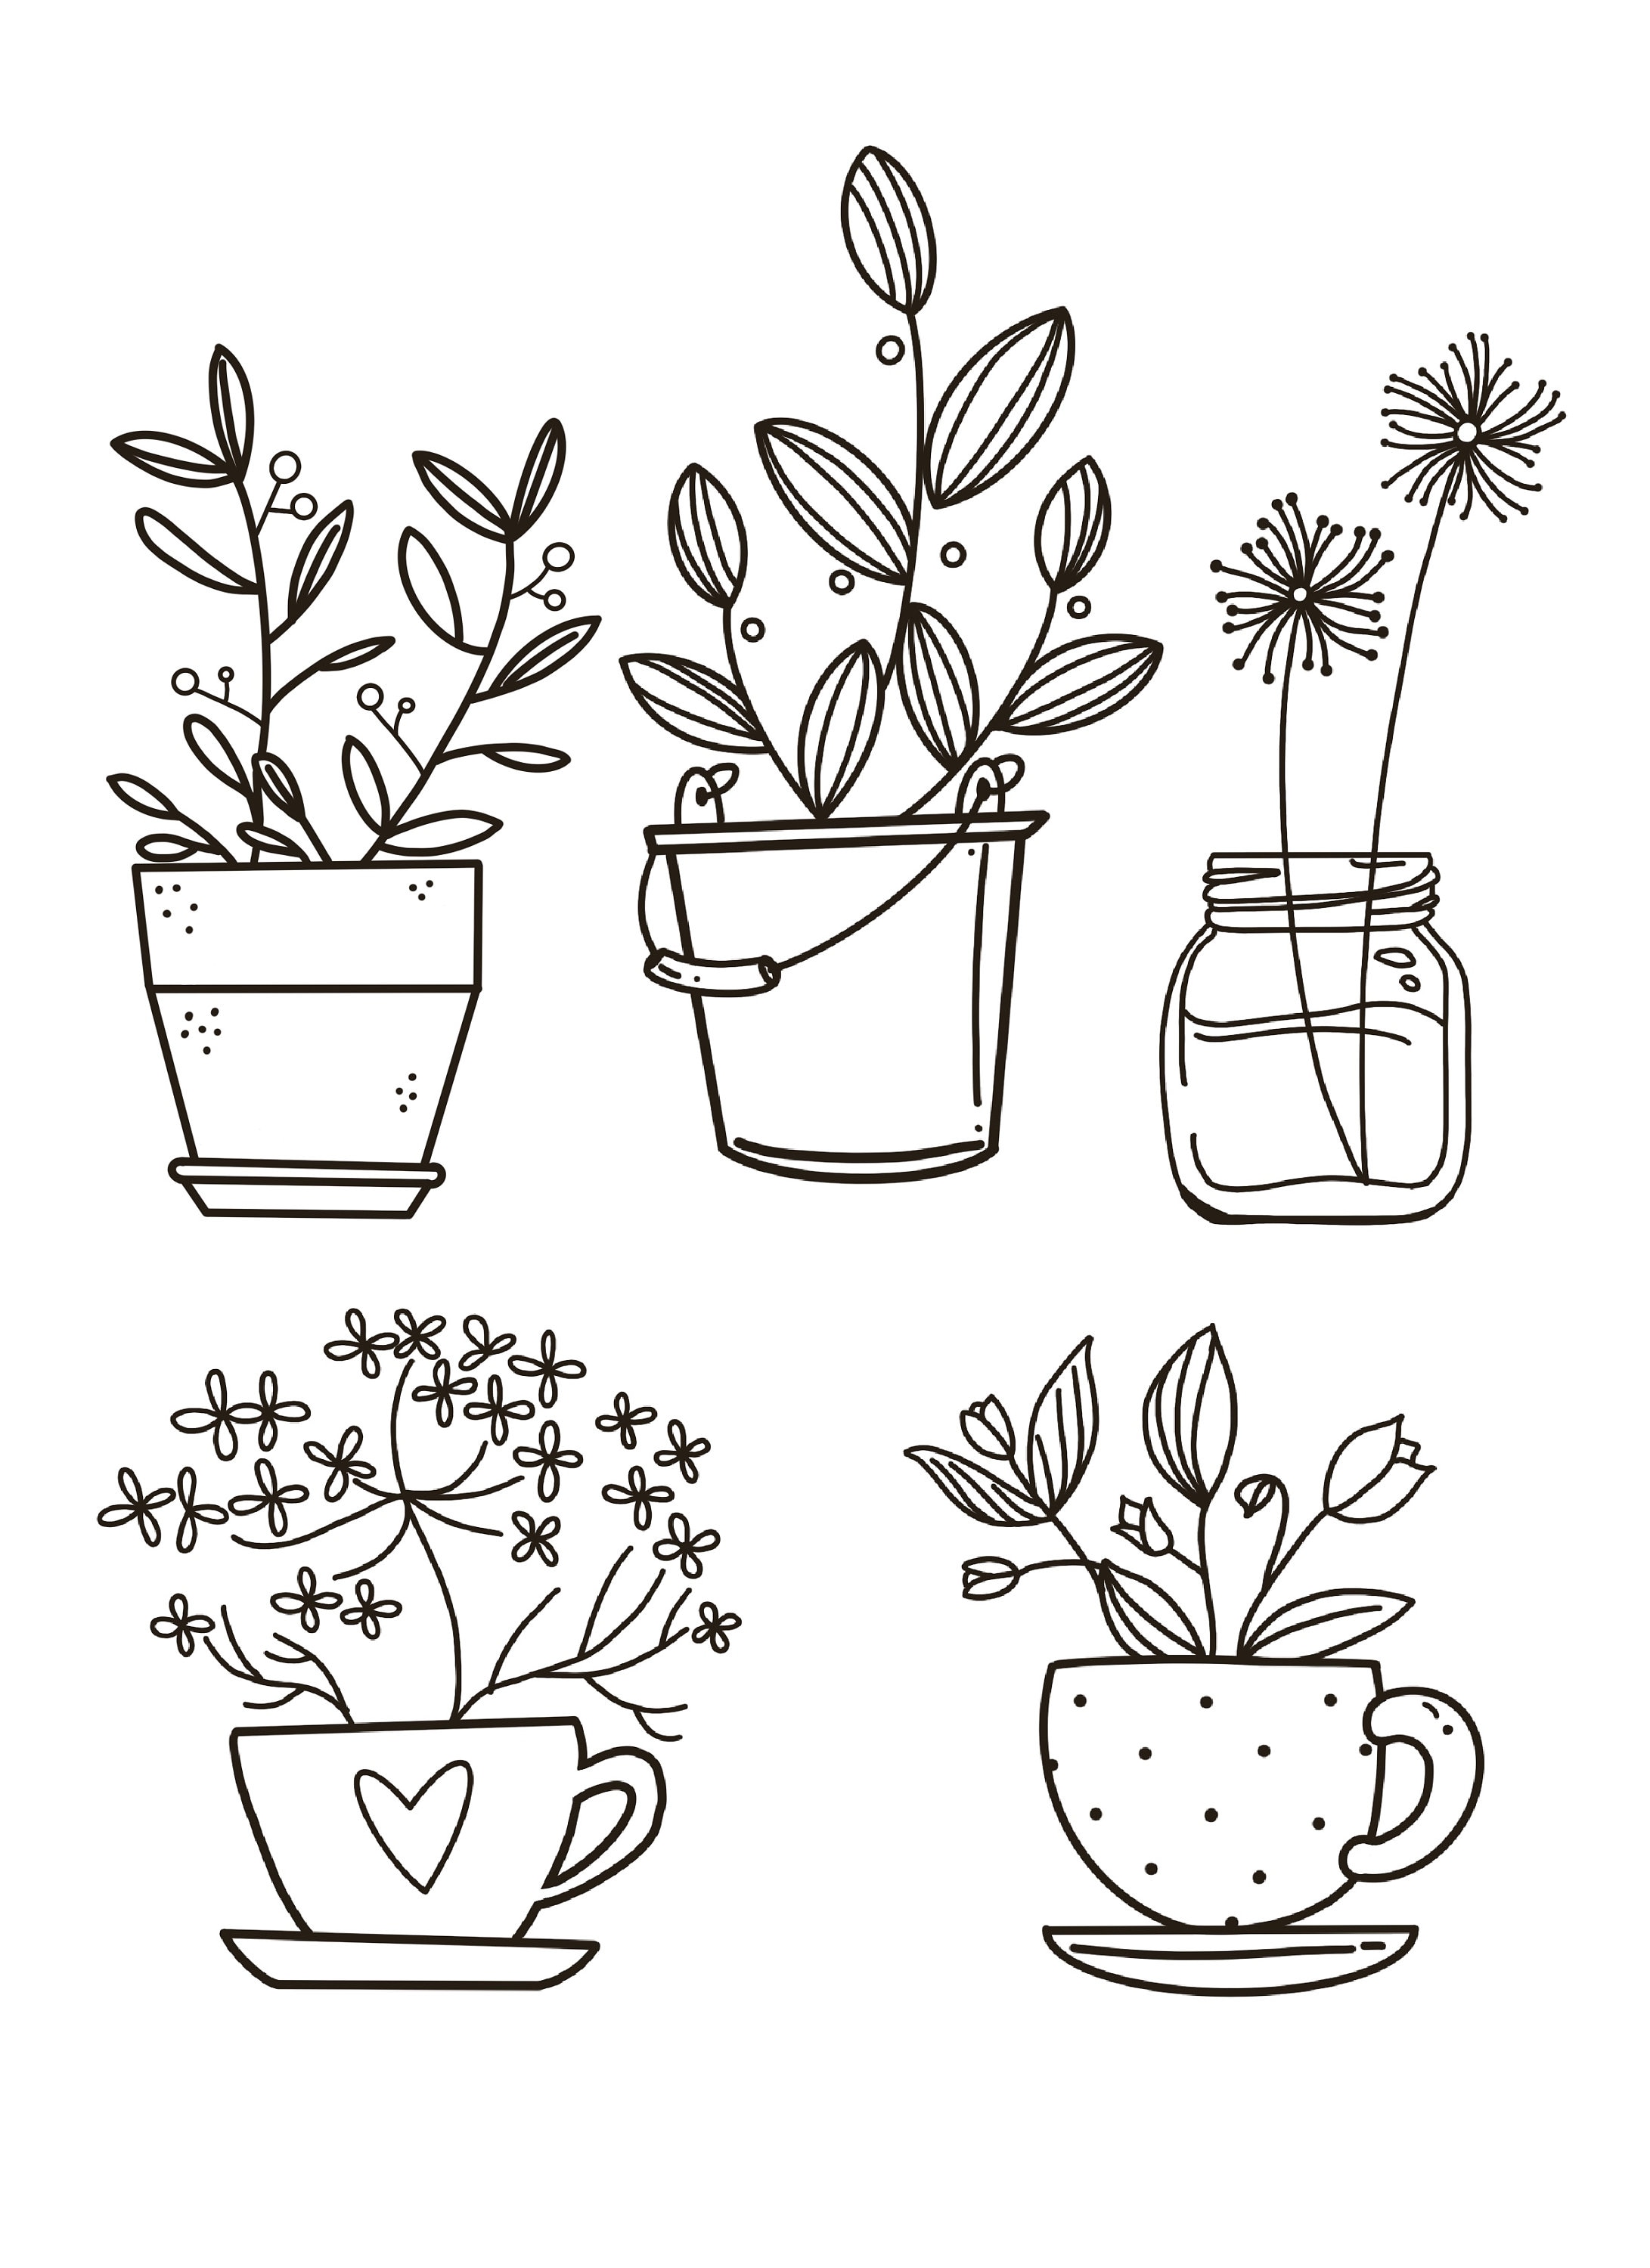 Coloring coloring pages plant lover plant lover art plant coloring pages cactus coloring book plant coloring book plant lover art